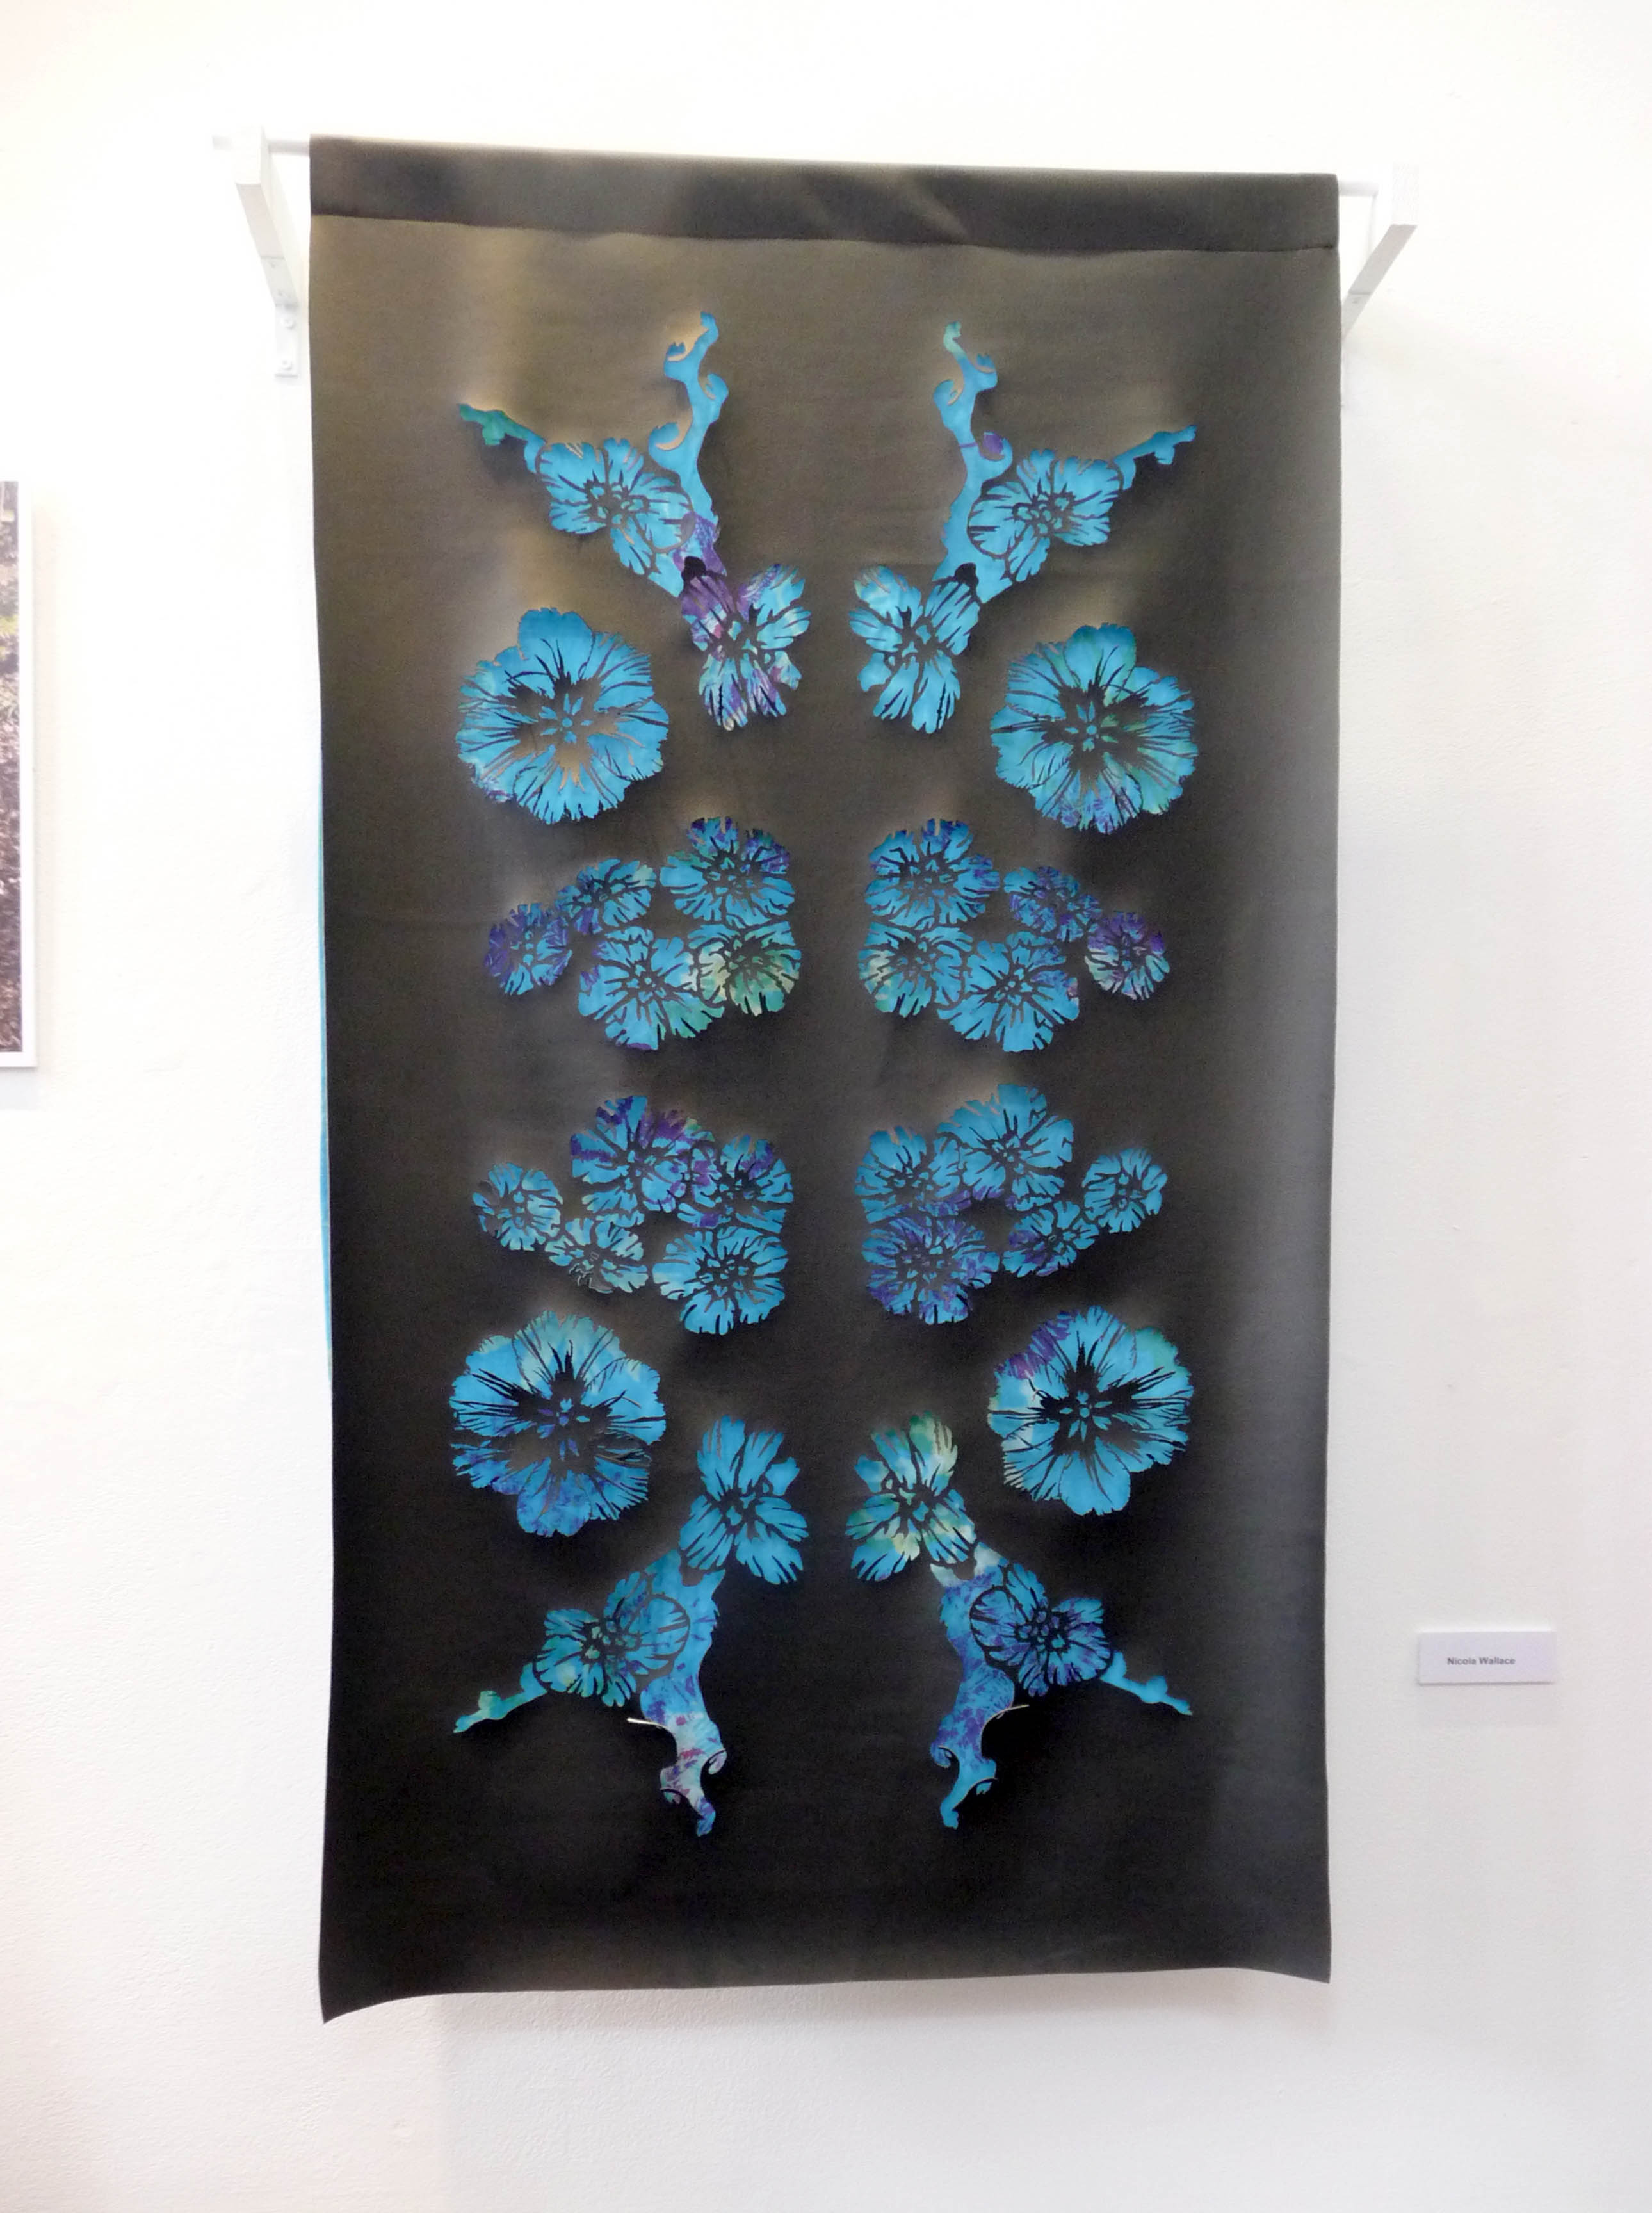 paper cut overlaid on printed textile by Nicola Wallace, Liverpool Hope Univ Art Degree Show 2014